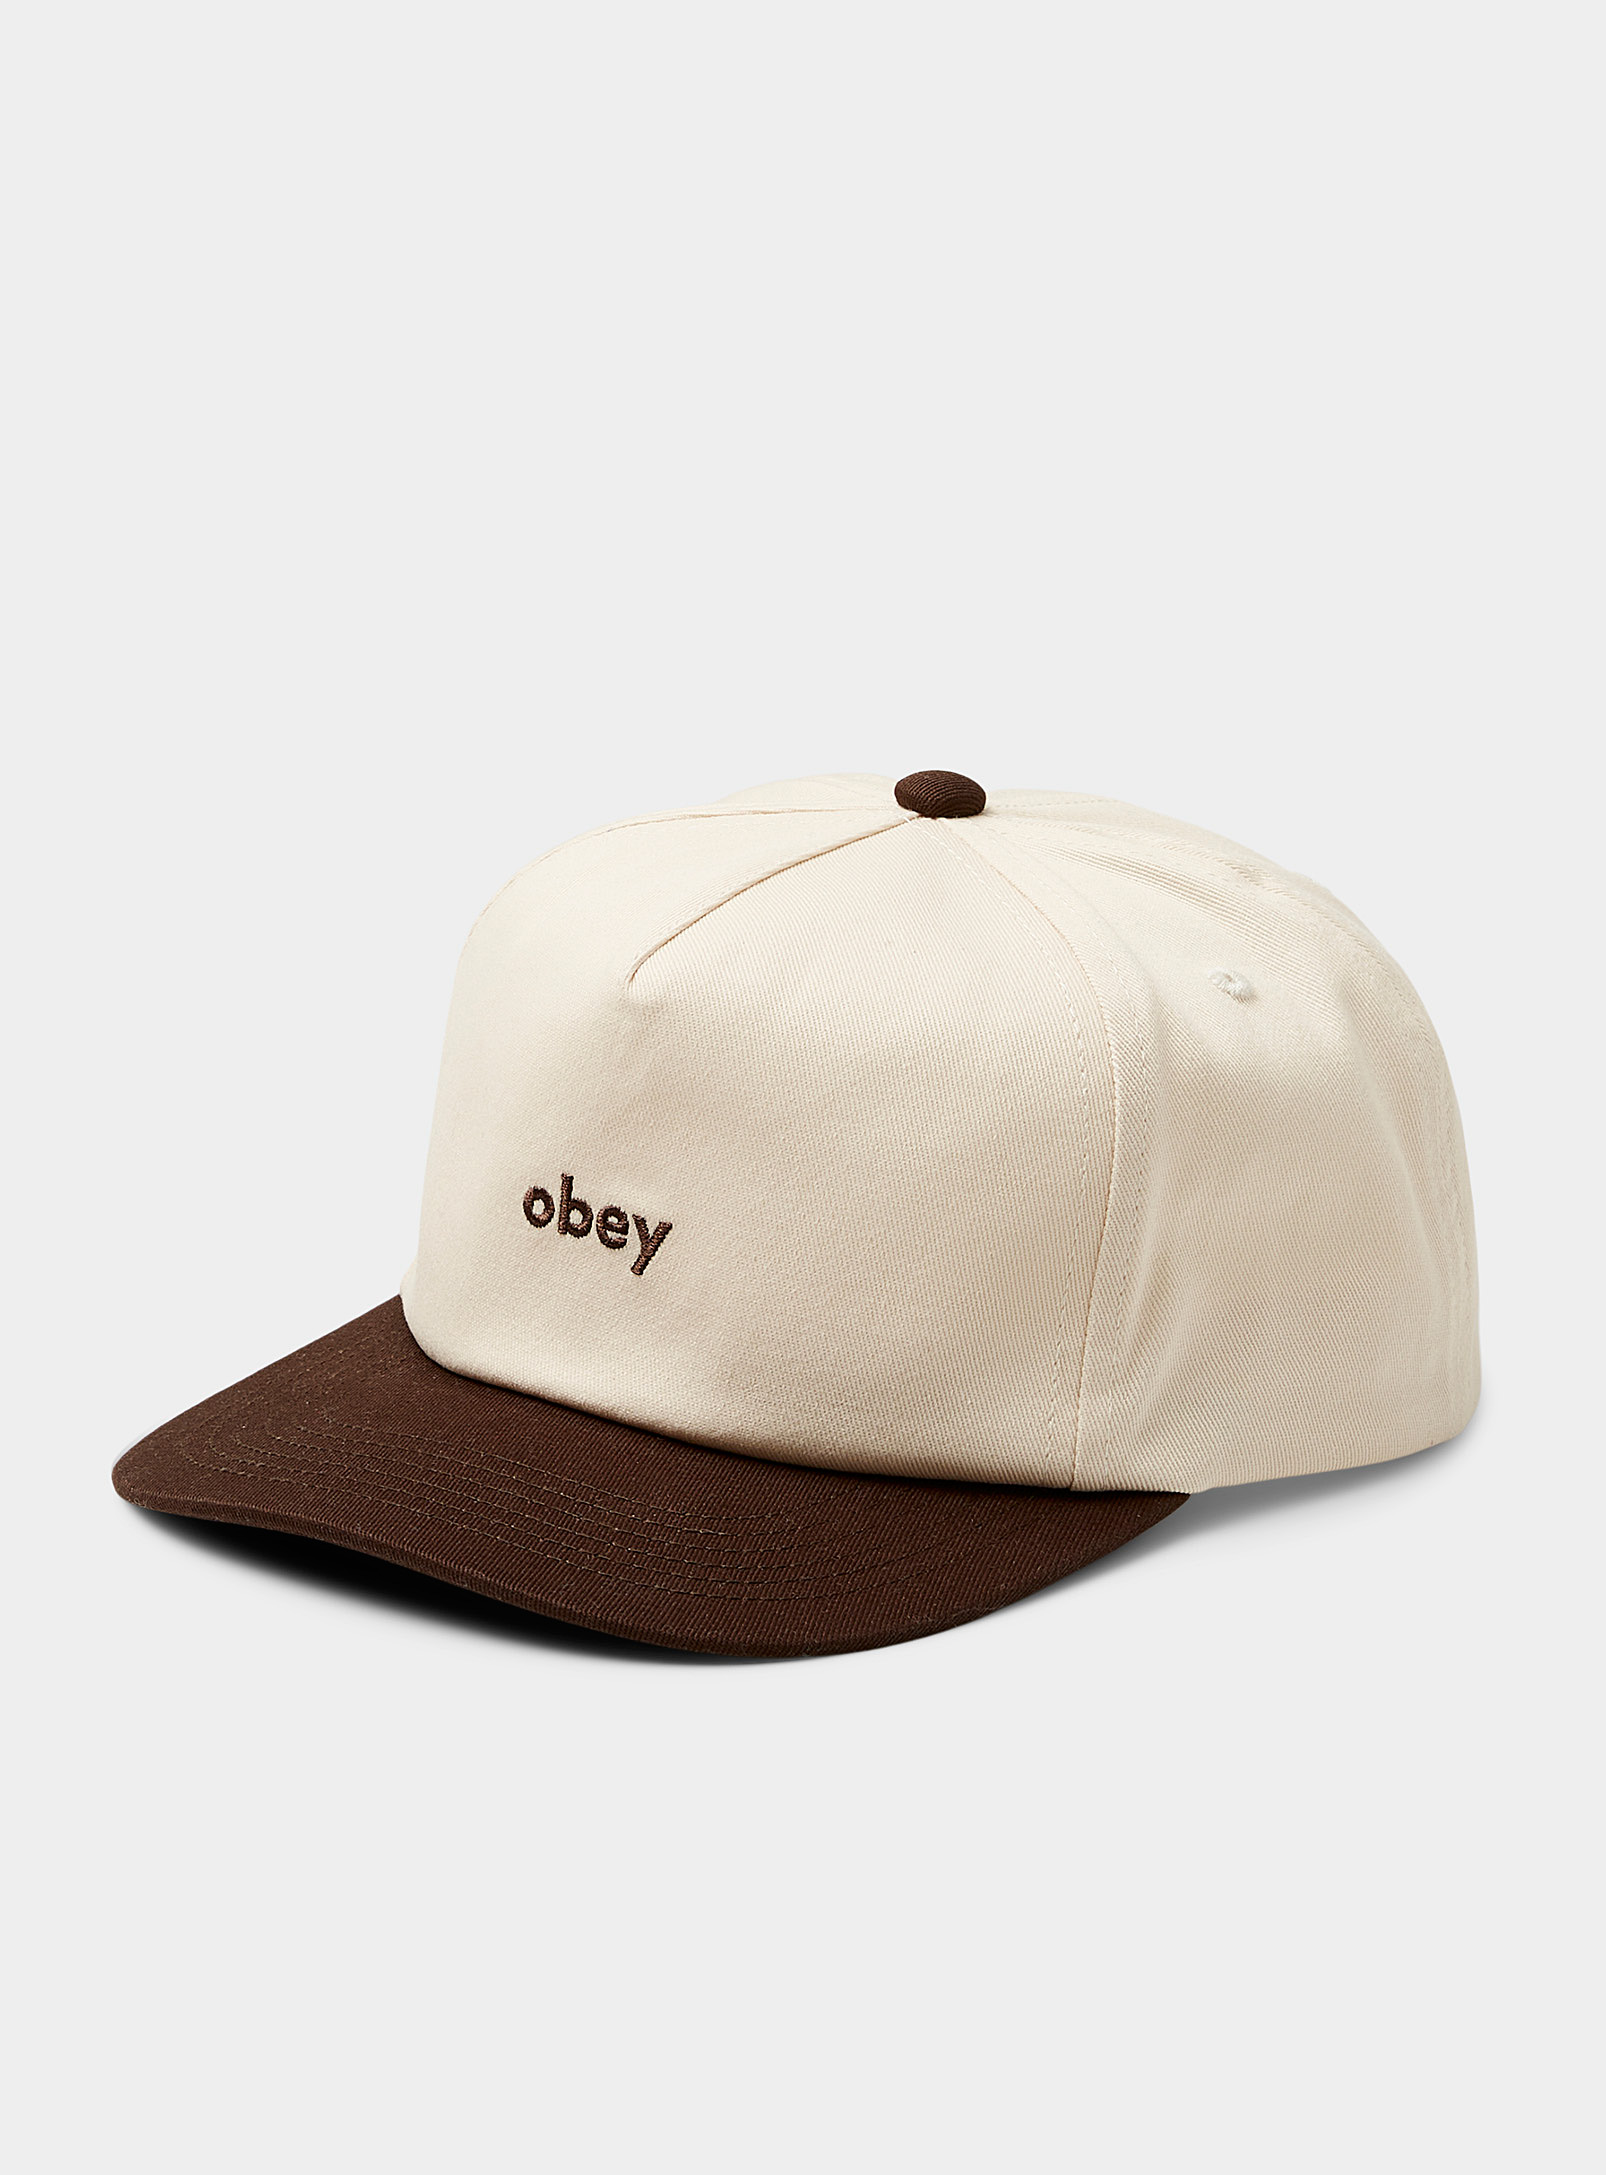 Obey - Men's Embroidered-logo two-tone cap